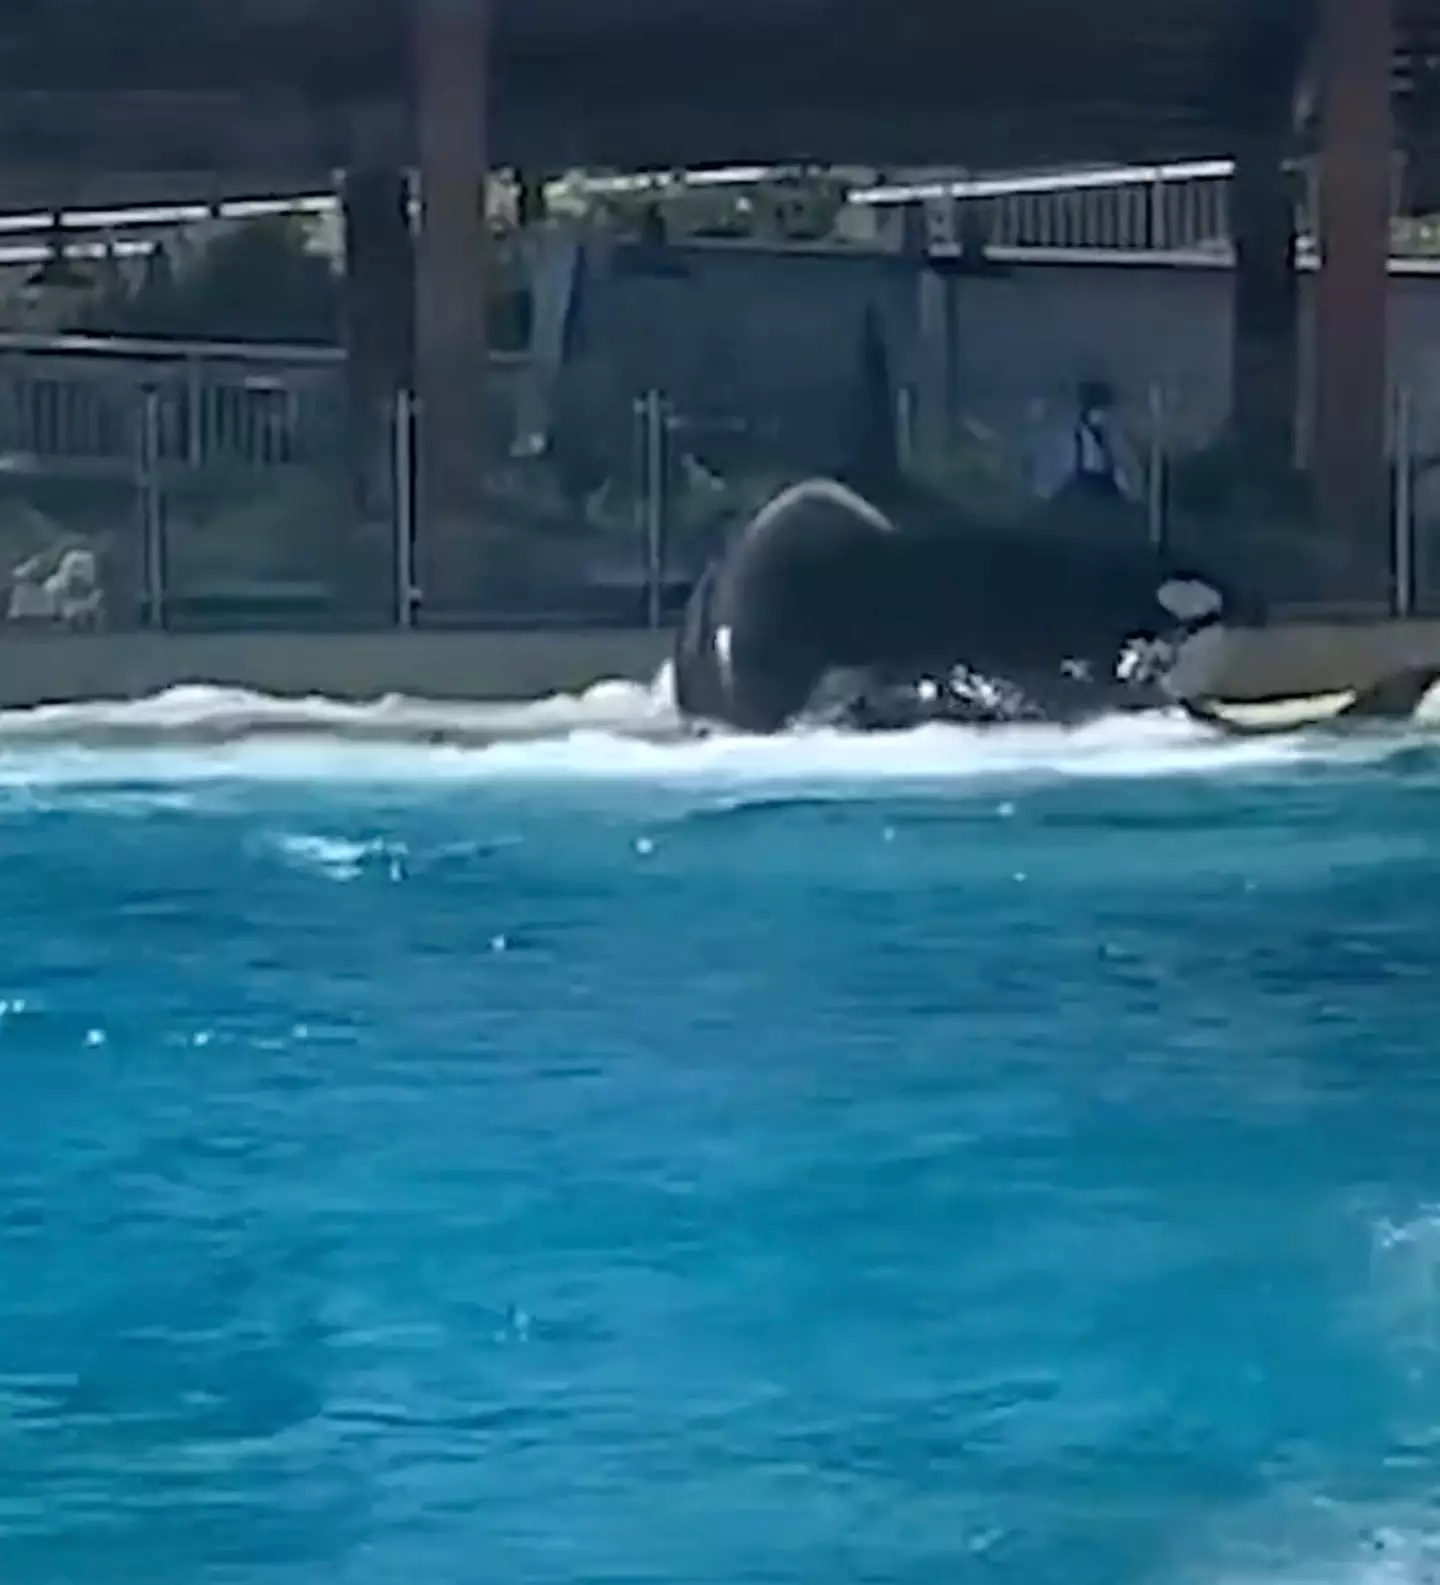 Orcas were seen fighting at SeaWorld.